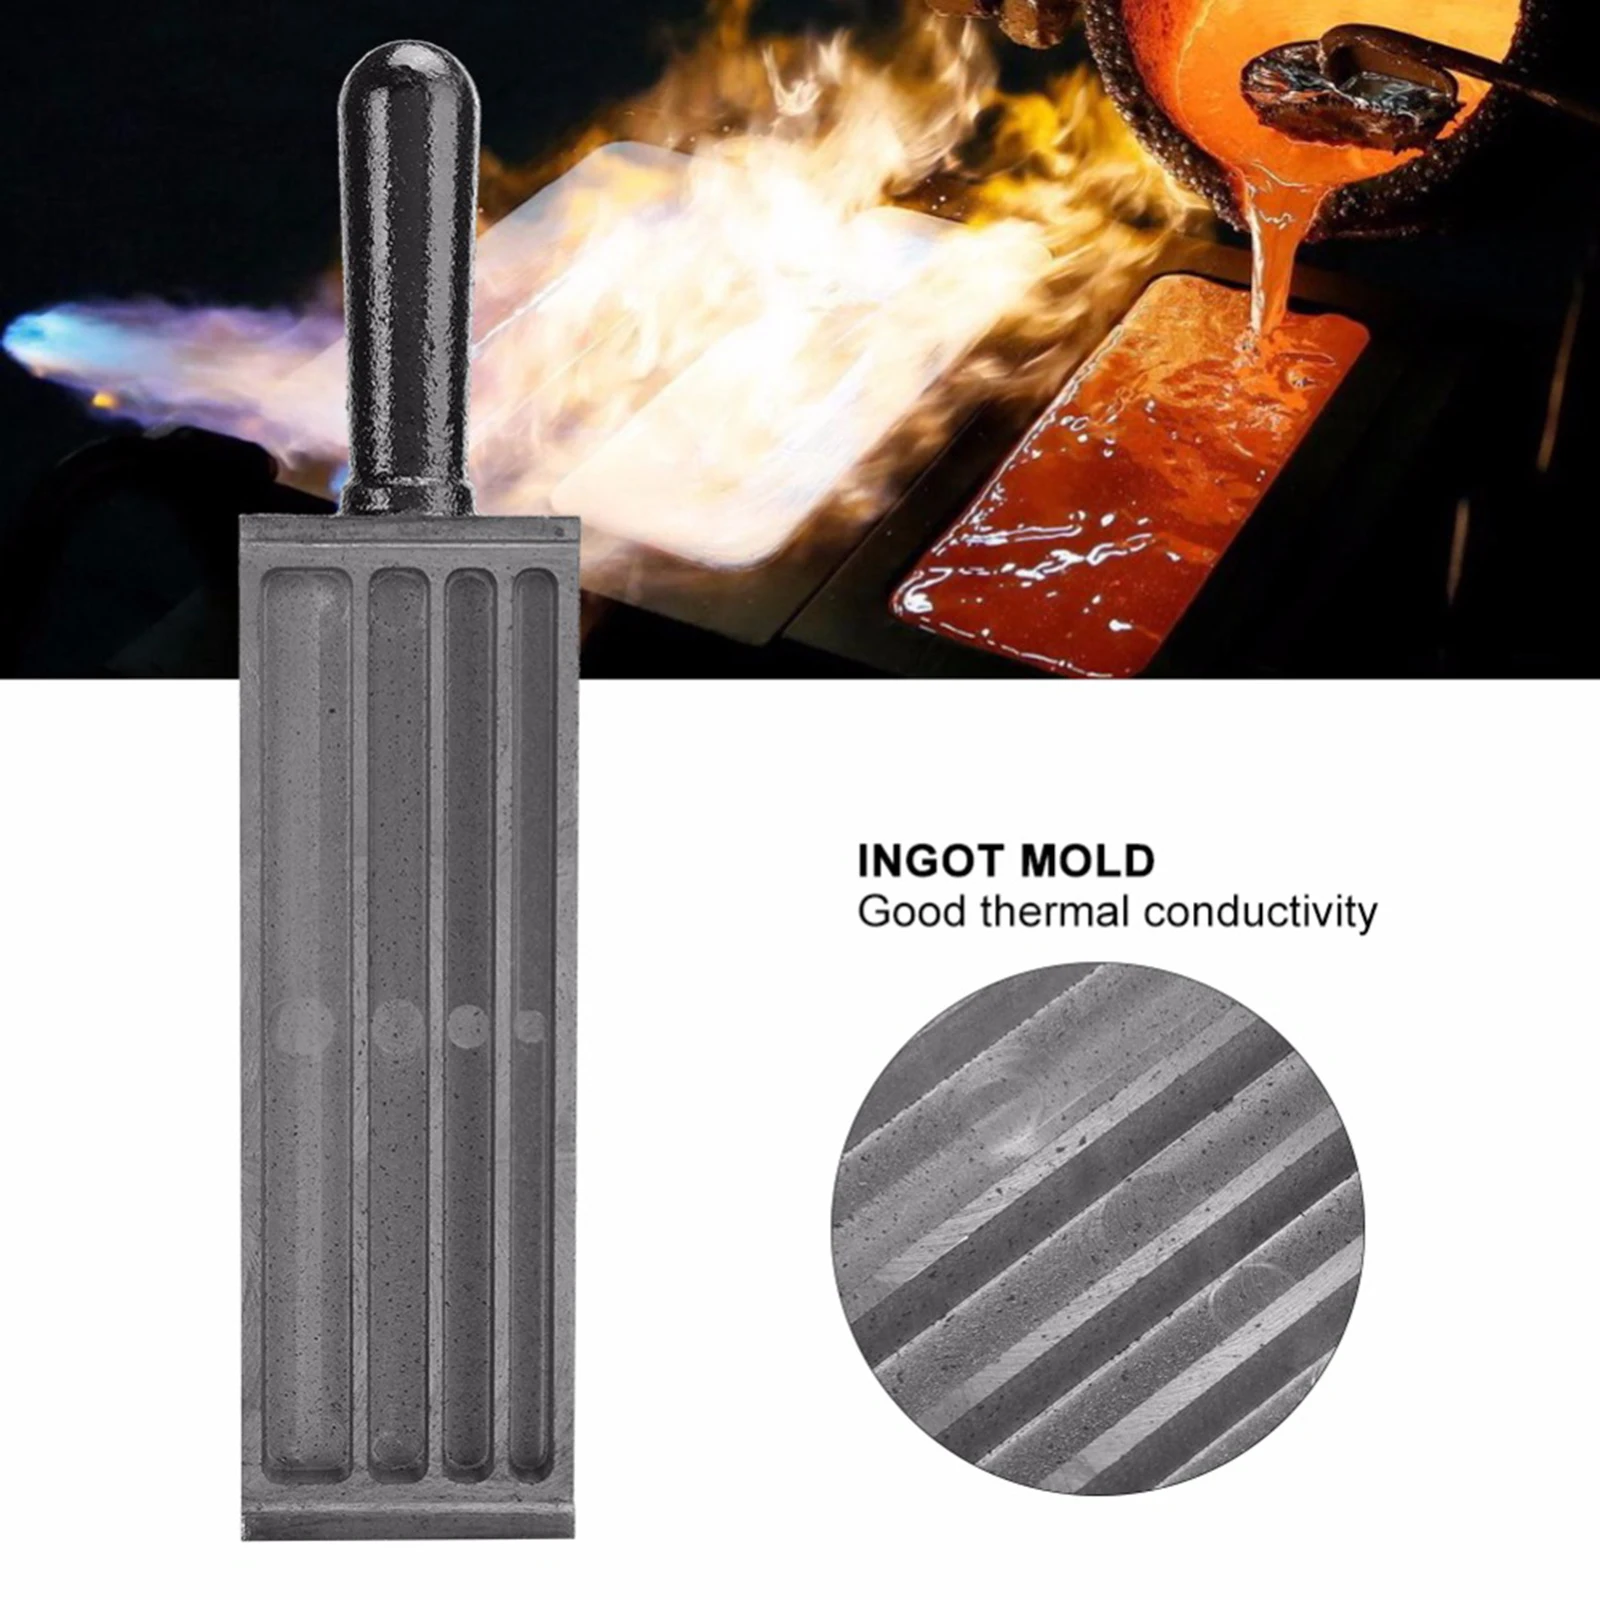 Portable Graphite Ingot Mold Mould Crucible for Melting Casting Refining Gold Silver Metal, Black , with Handle Design